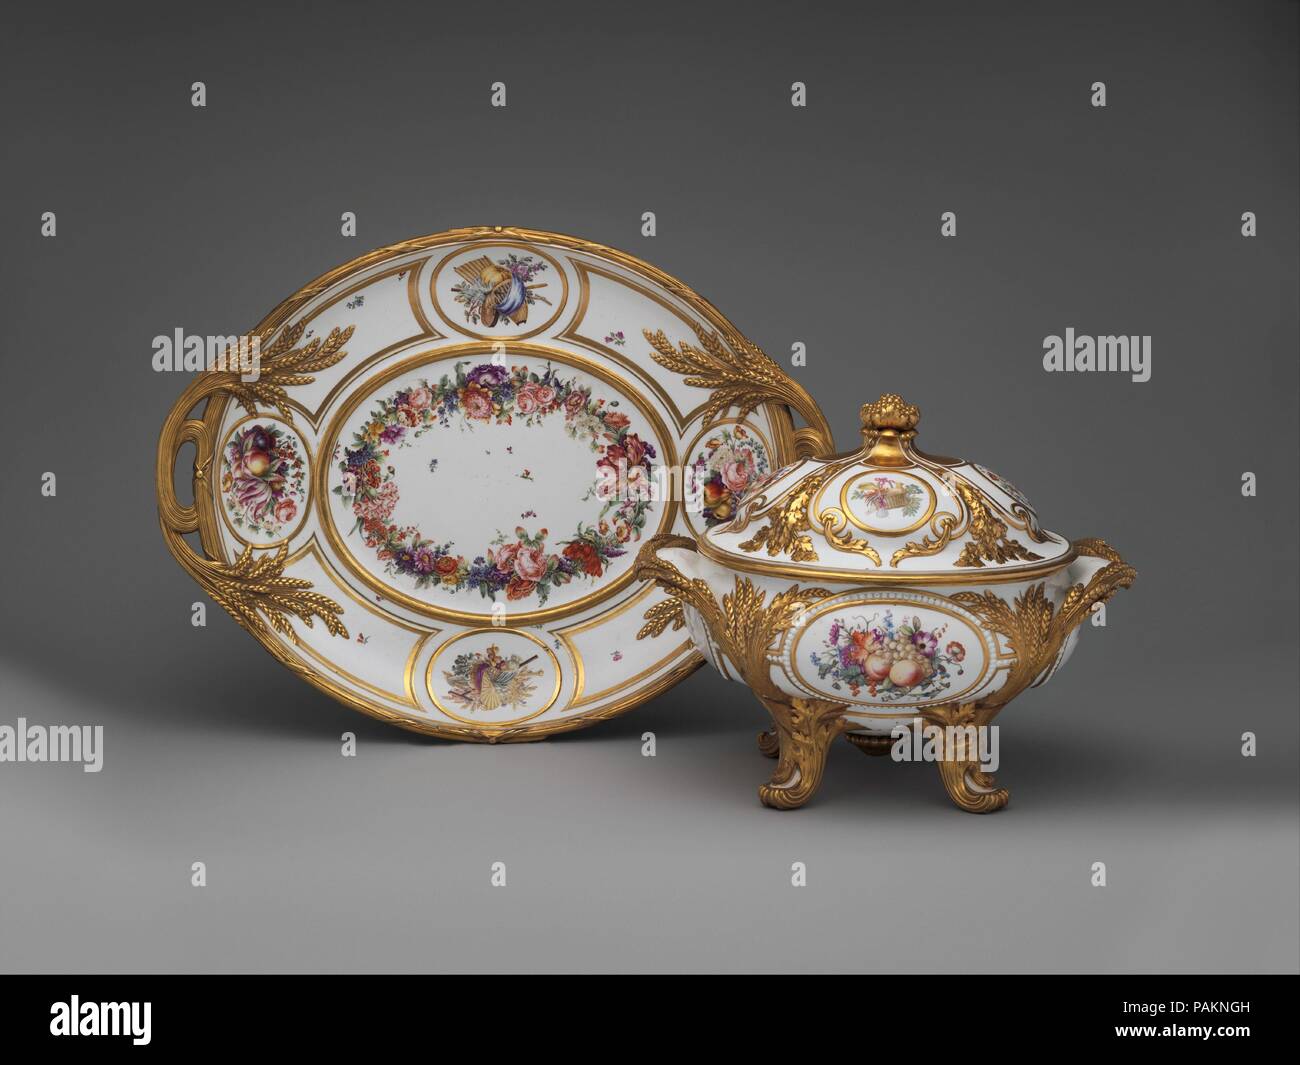 Stand. Culture: French, Sèvres. Decorator: François Antoine Pfeiffer (French, active 1771-1800); Nicolas Sinsson (French, active 1773-1795). Dimensions: Overall (confirmed): 3 × 24 1/4 × 18 1/2 in. (7.6 × 61.6 × 47 cm). Factory: Sèvres Manufactory (French, 1740-present). Maker: Gilded by Henri-François Vincent (active 1753-1806). Date: ca. 1777-85. Museum: Metropolitan Museum of Art, New York, USA. Stock Photo